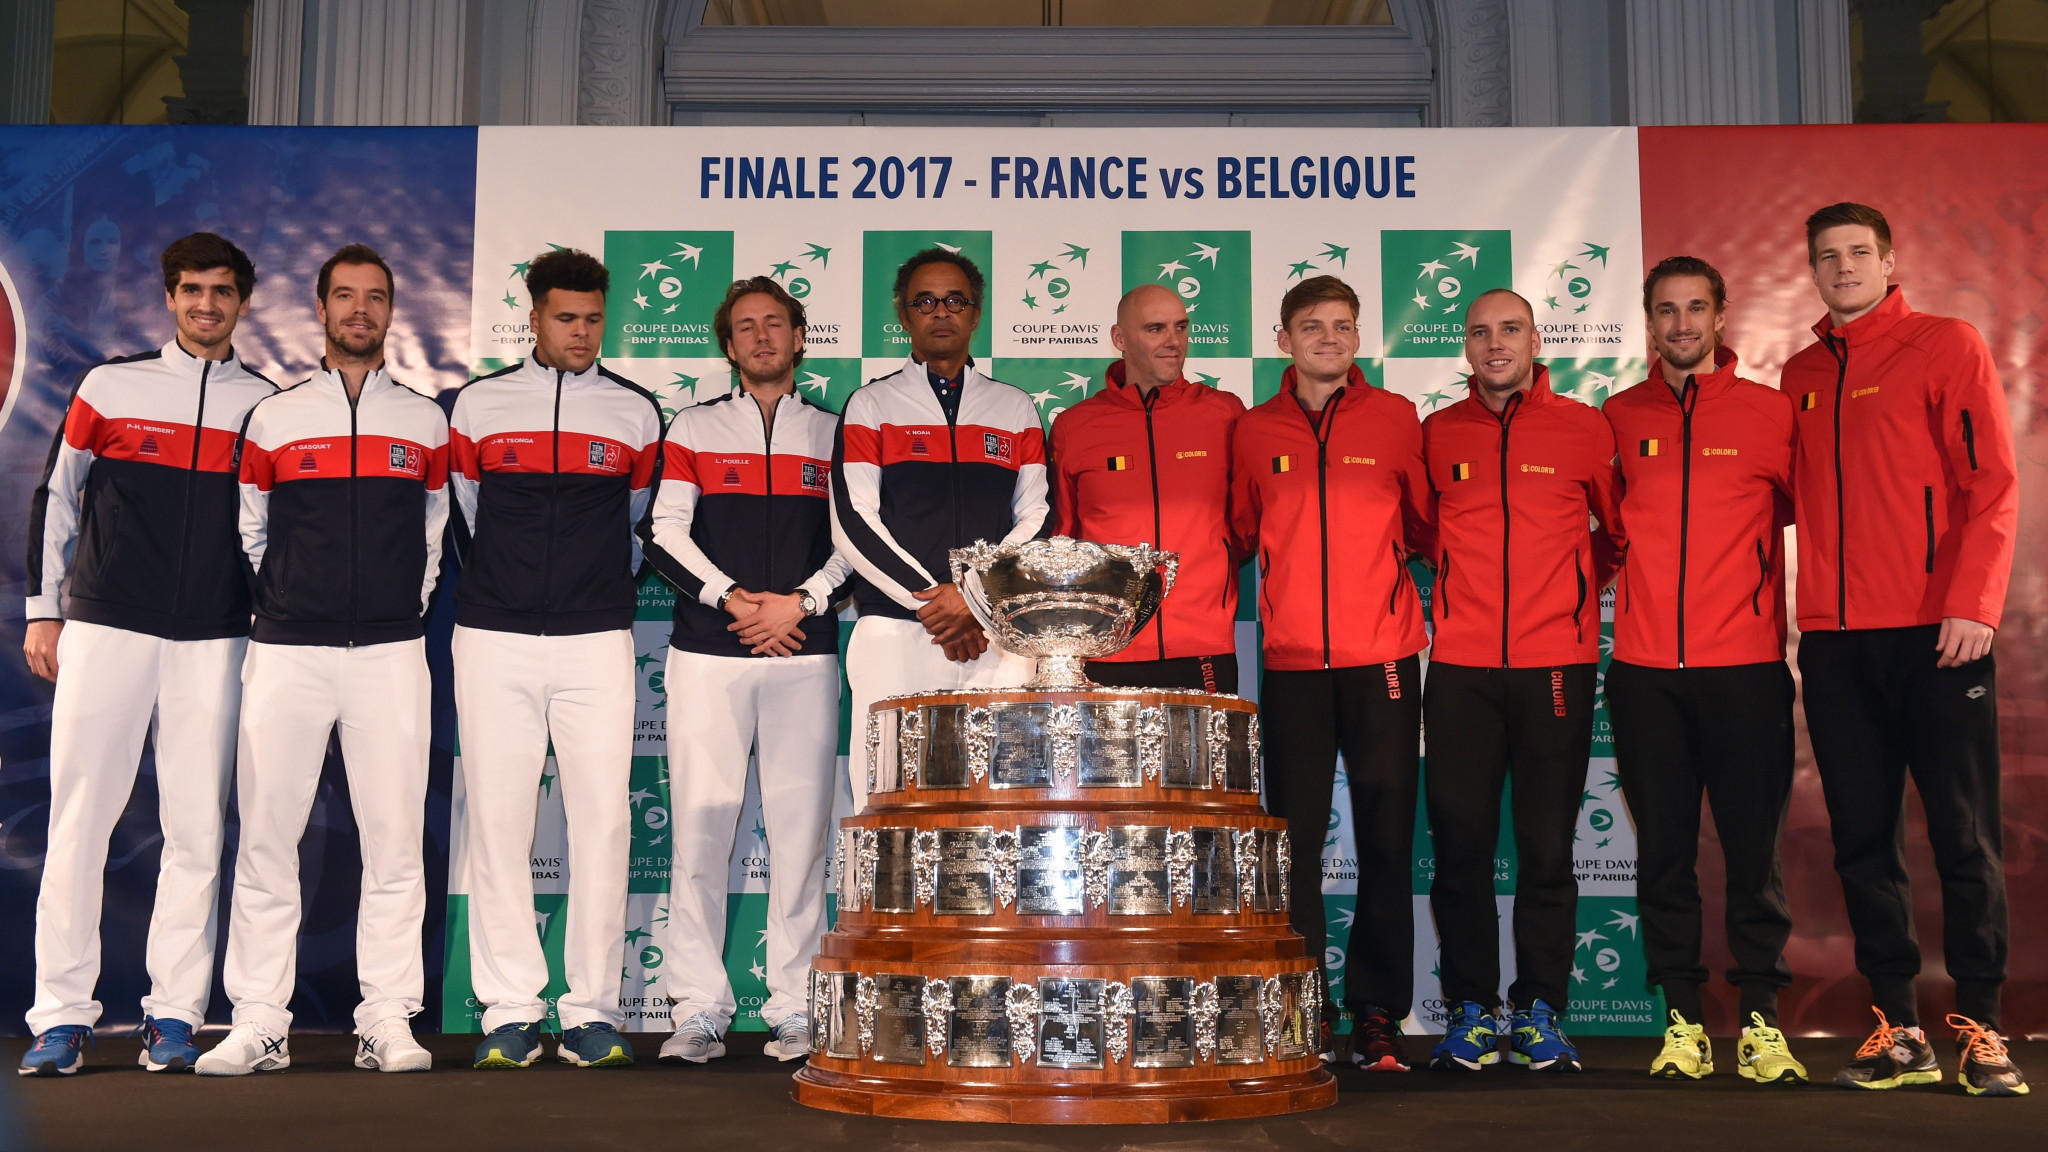 The Davis Cup is set to be revamped by the International Tennis Federation in 2019, meaning two rival team competitions will take place from 2020 ©Getty Images